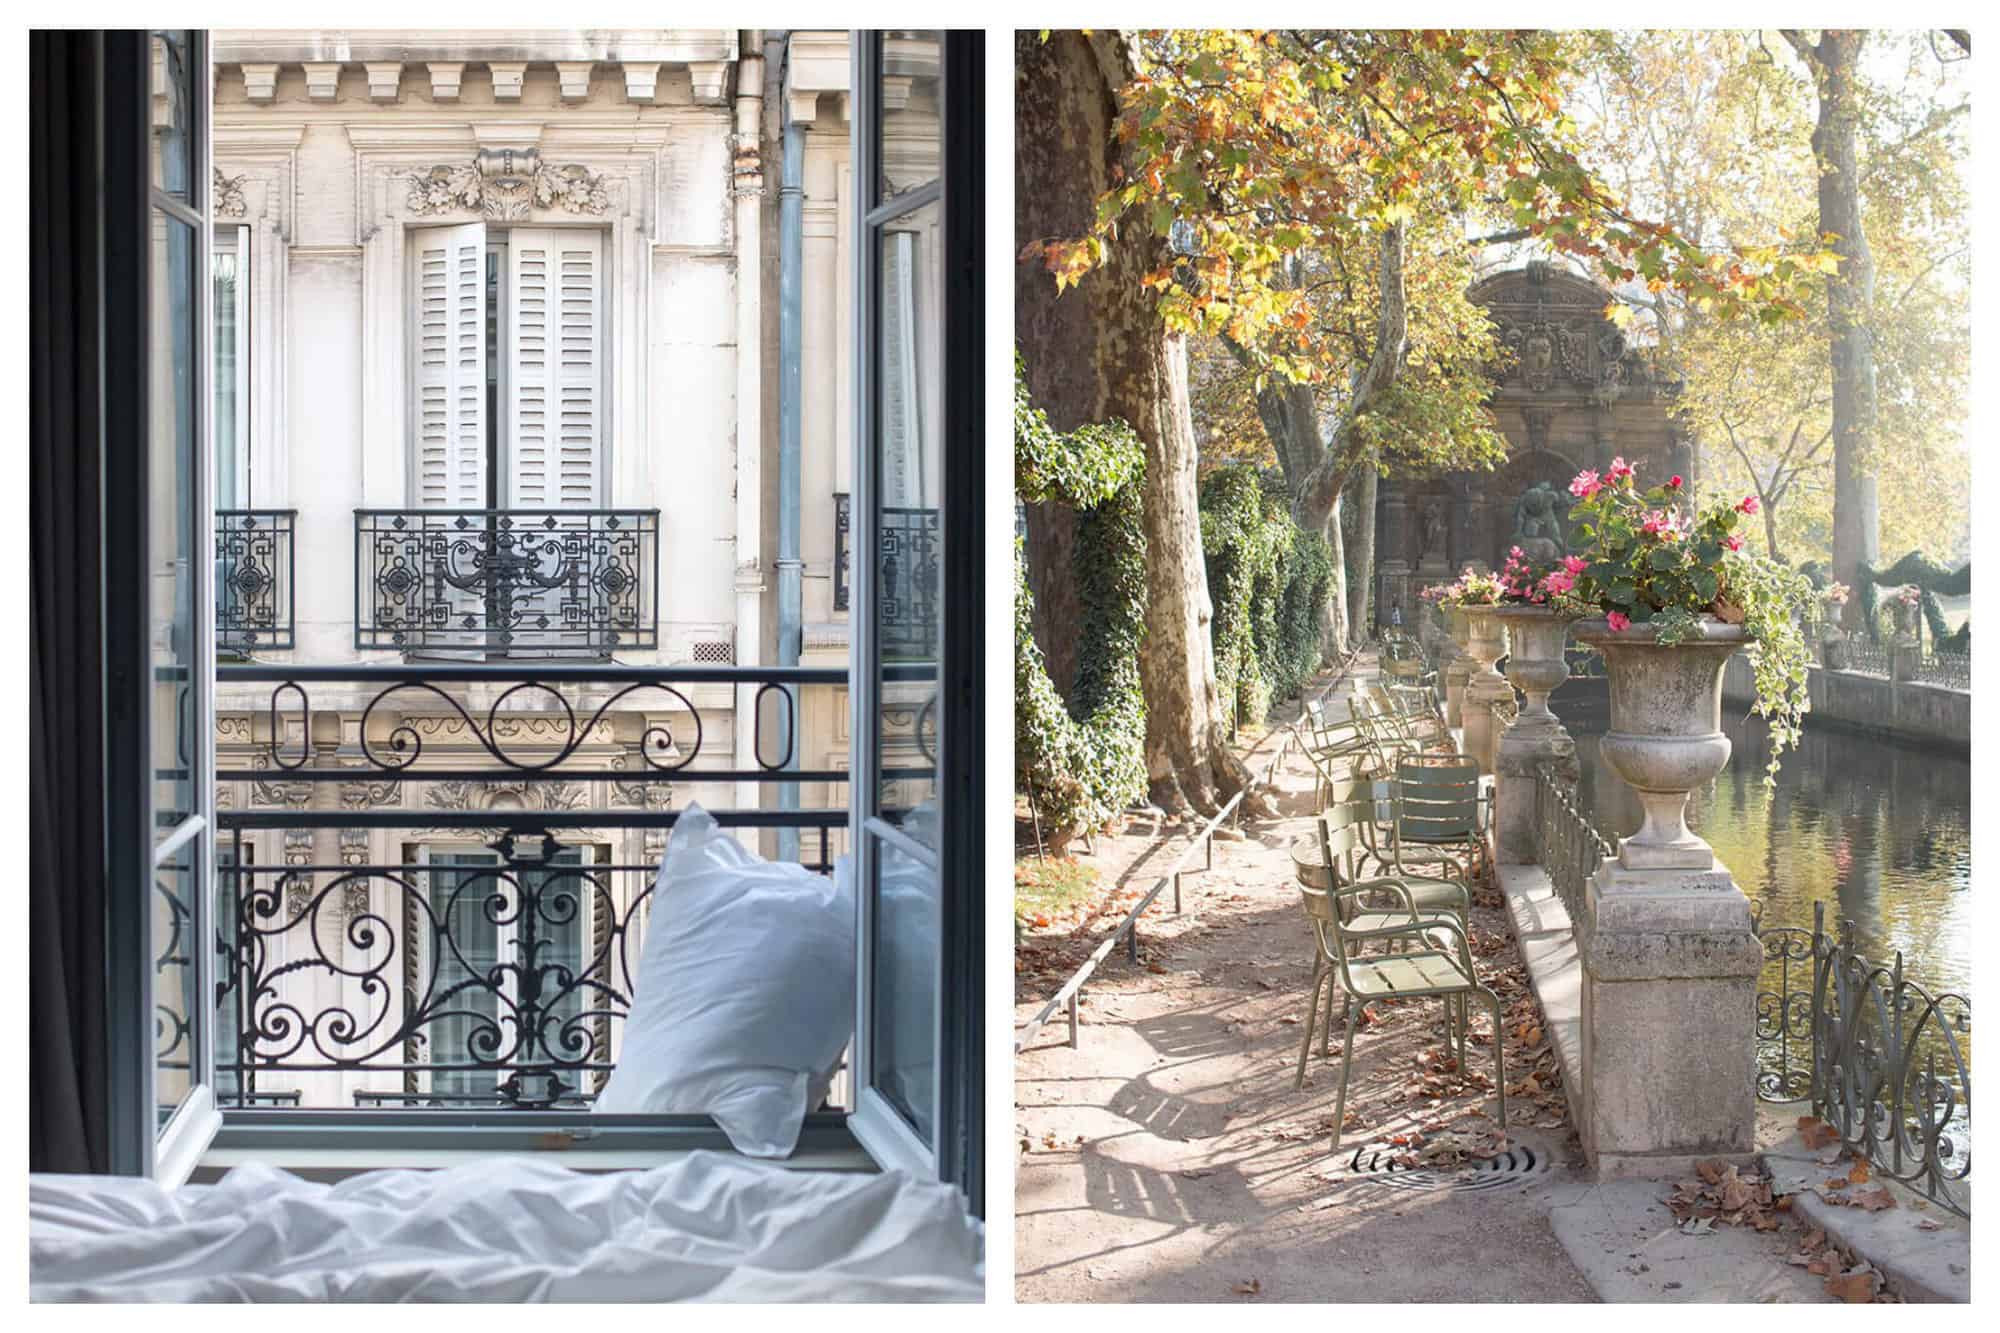 Left: the view out of a Parisian bedroom onto the Haussmannien building opposite it. There is white bedding in front of the window and a white pillow leaning on the balcony.
Right: the Medici fountain at Jardin du Luxembourg with empty chairs alongside it. 